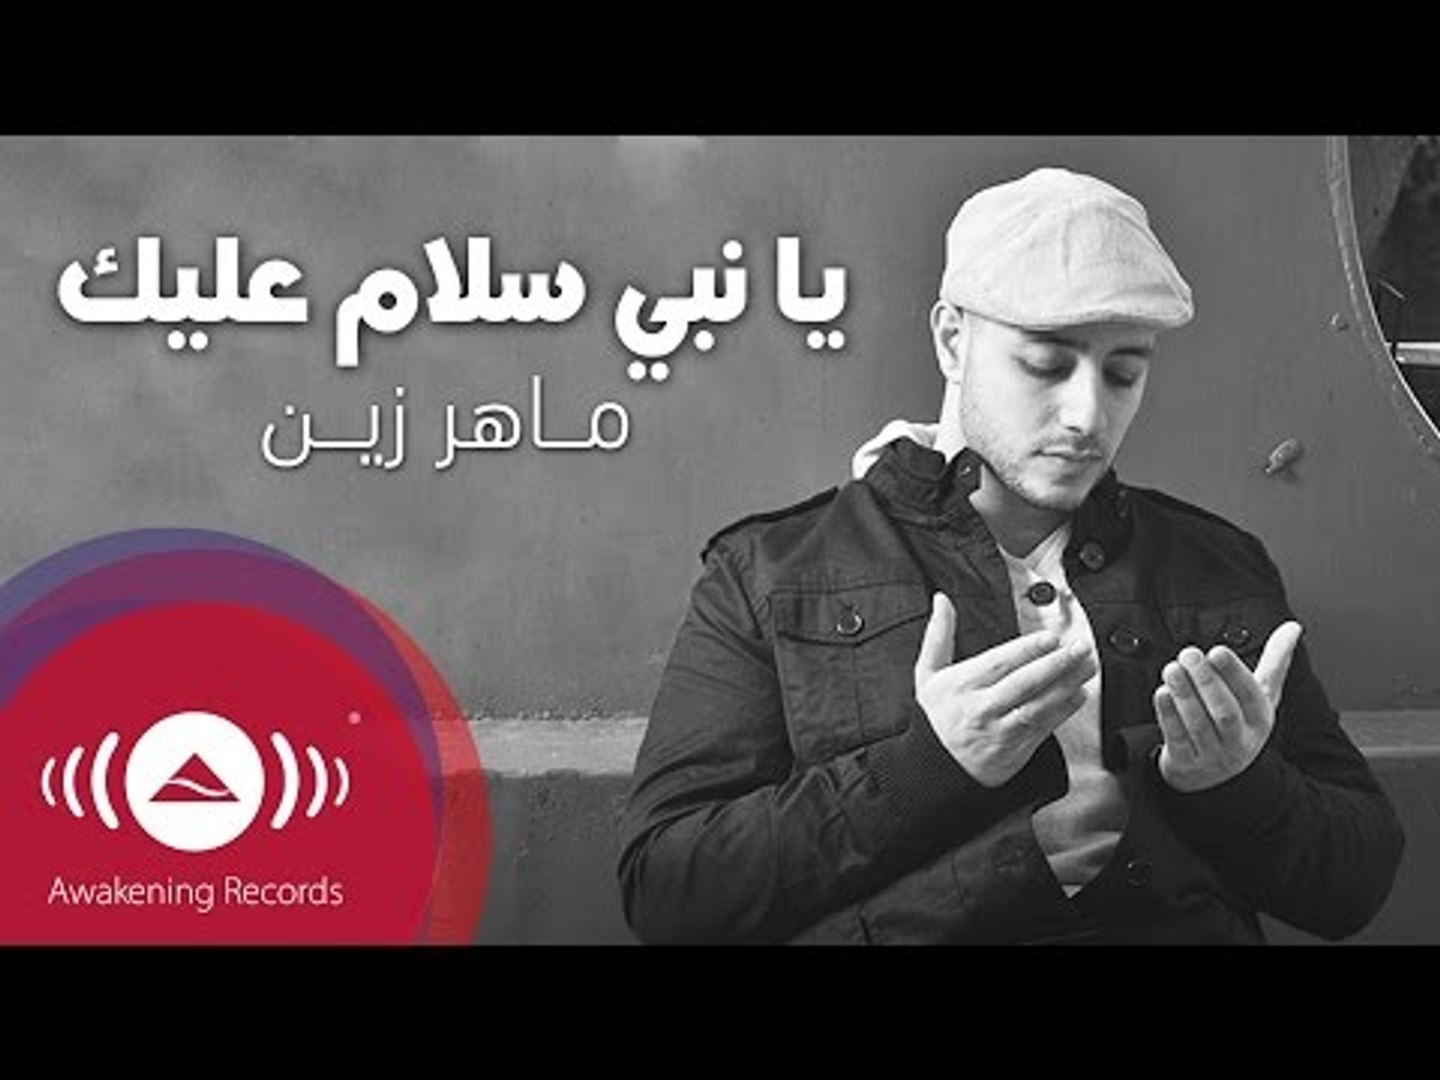 For the rest of my life maher. Махер Зейн нашиды. For the rest of my Life Махер Зейн. Thank you Allah Махер Зейн. Maher Zain Insha Allah [percussive].